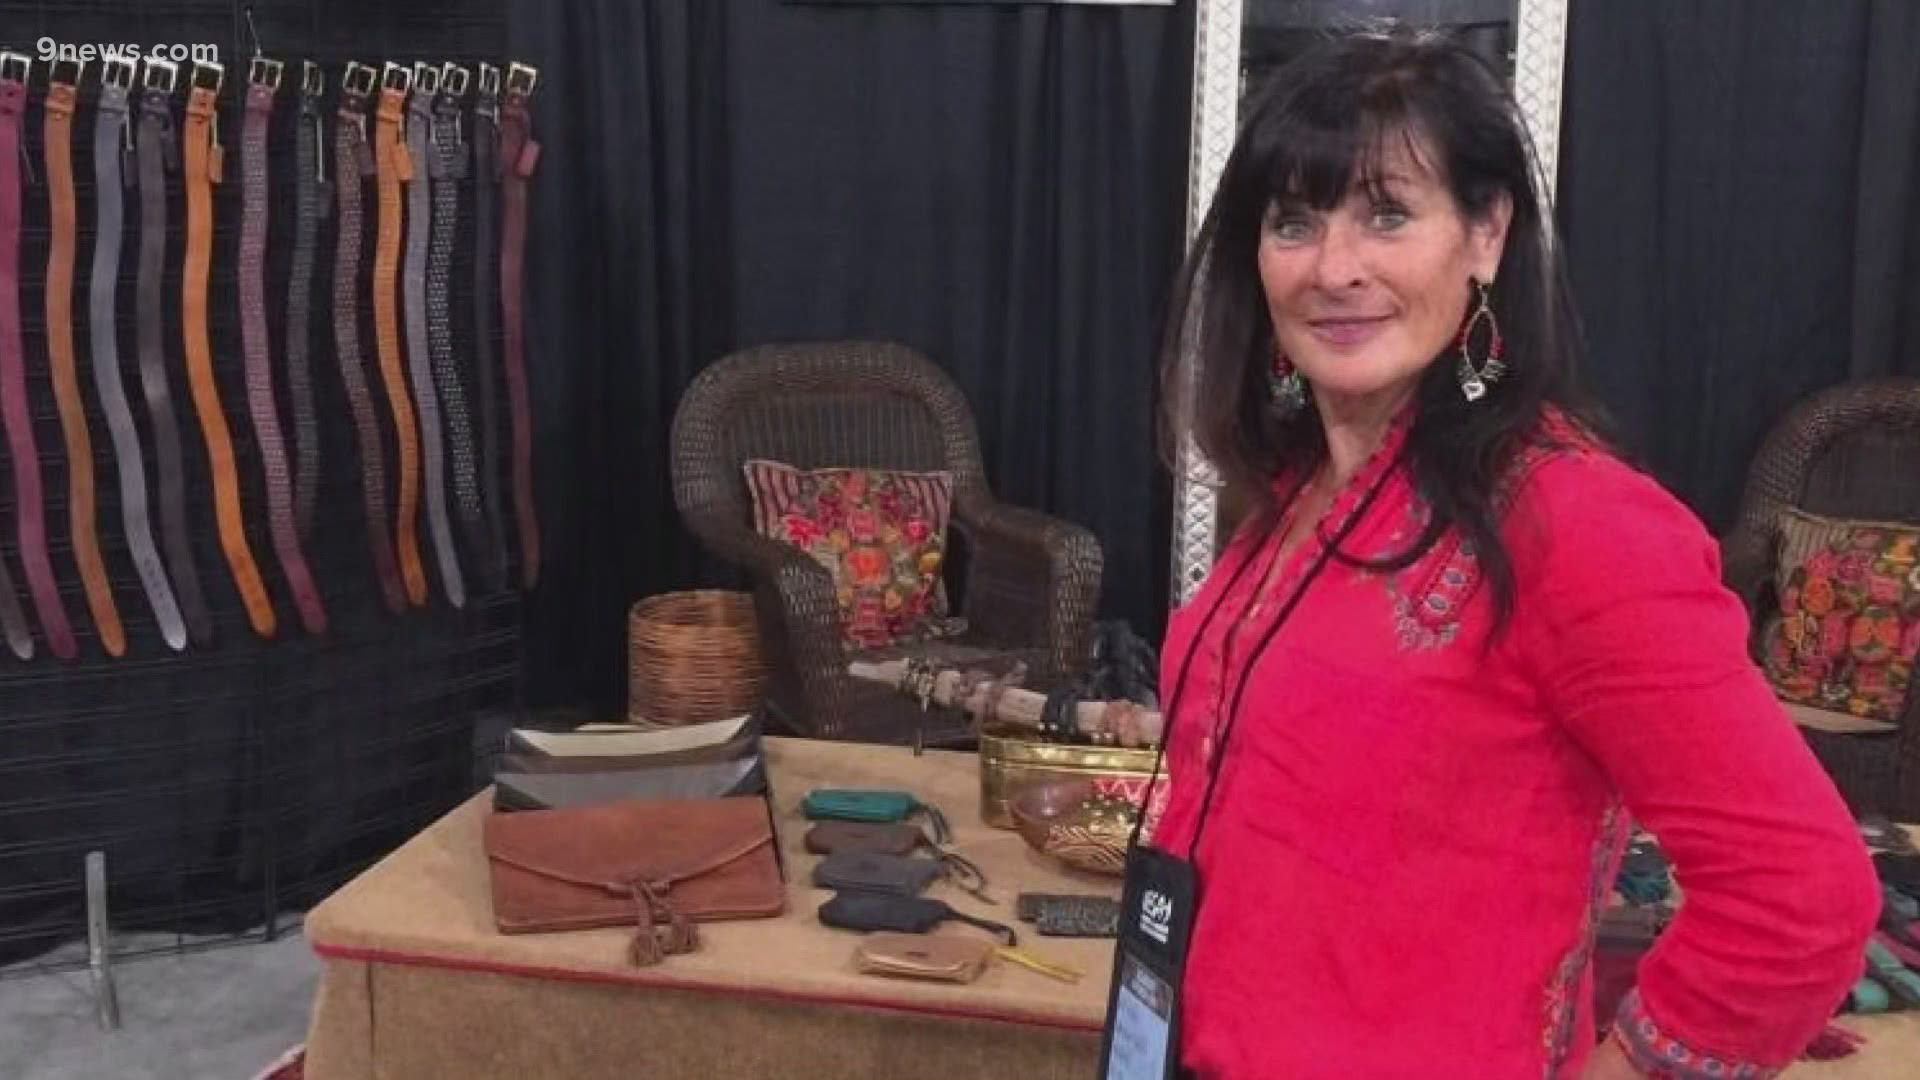 Jody Waters worked in Colorado’s fashion industry and had dreams of one day setting up her own boutique.